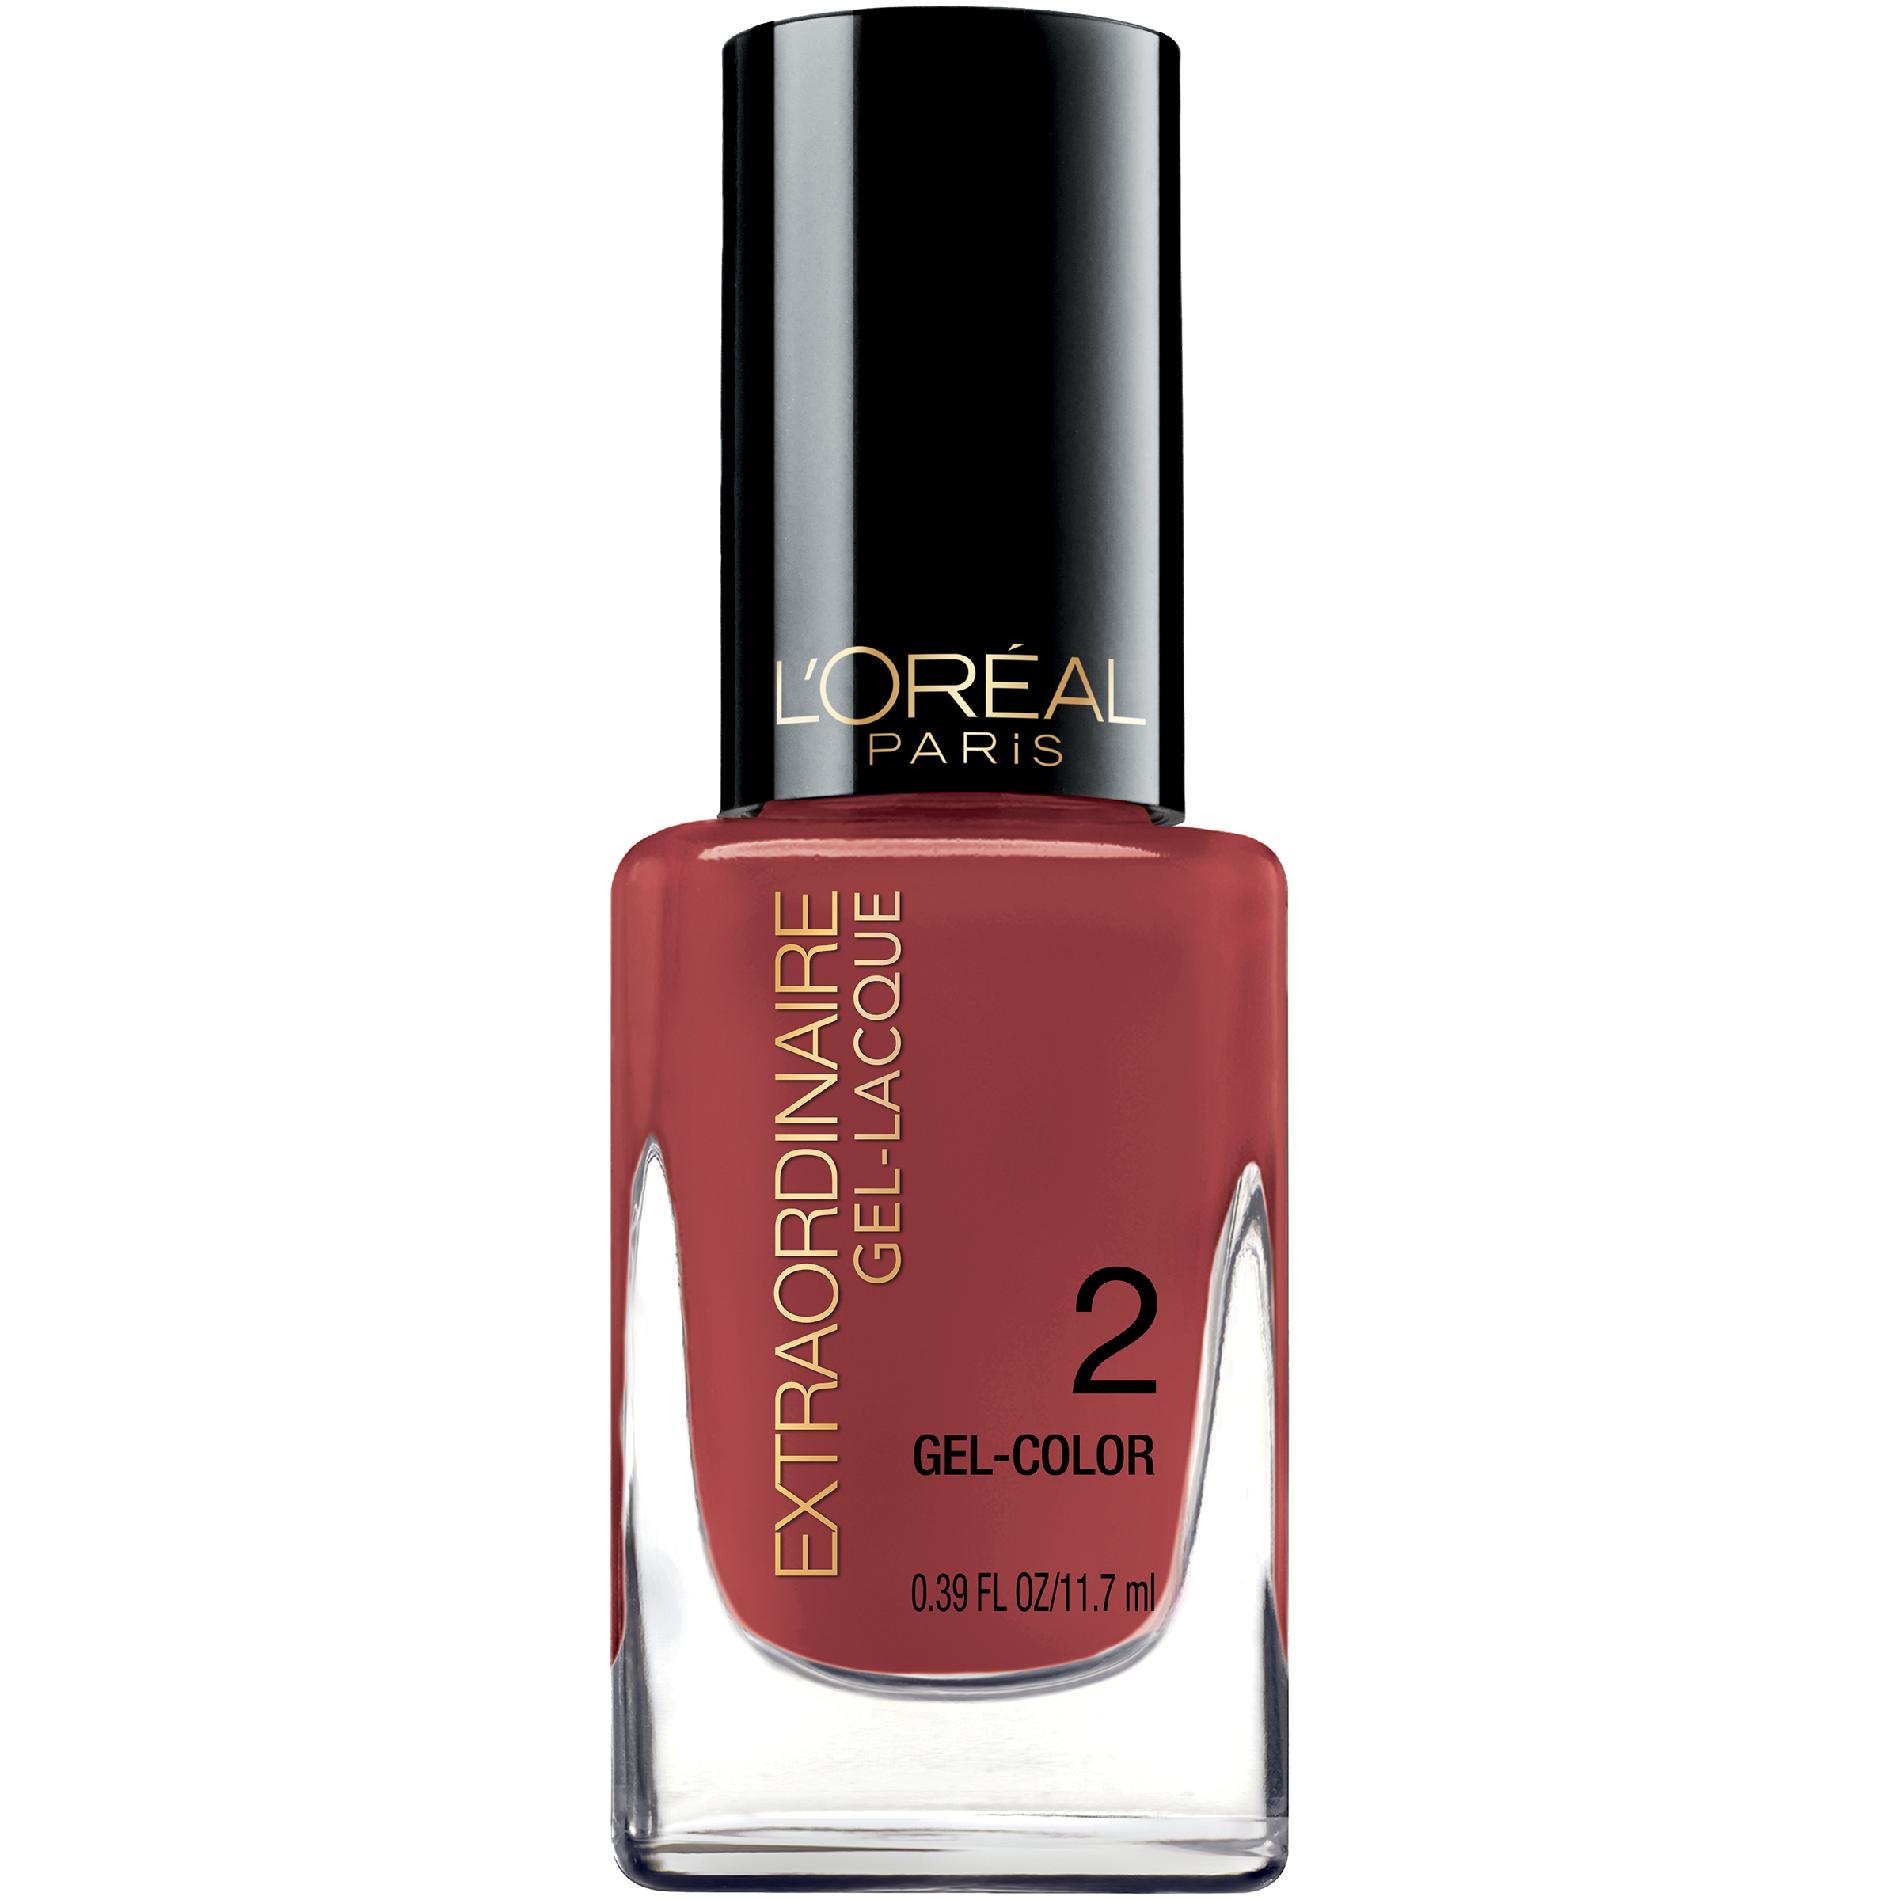 L'Oreal Gel-Lacque 1-2-3 Gel-Color, 709 Rose to the Occasion